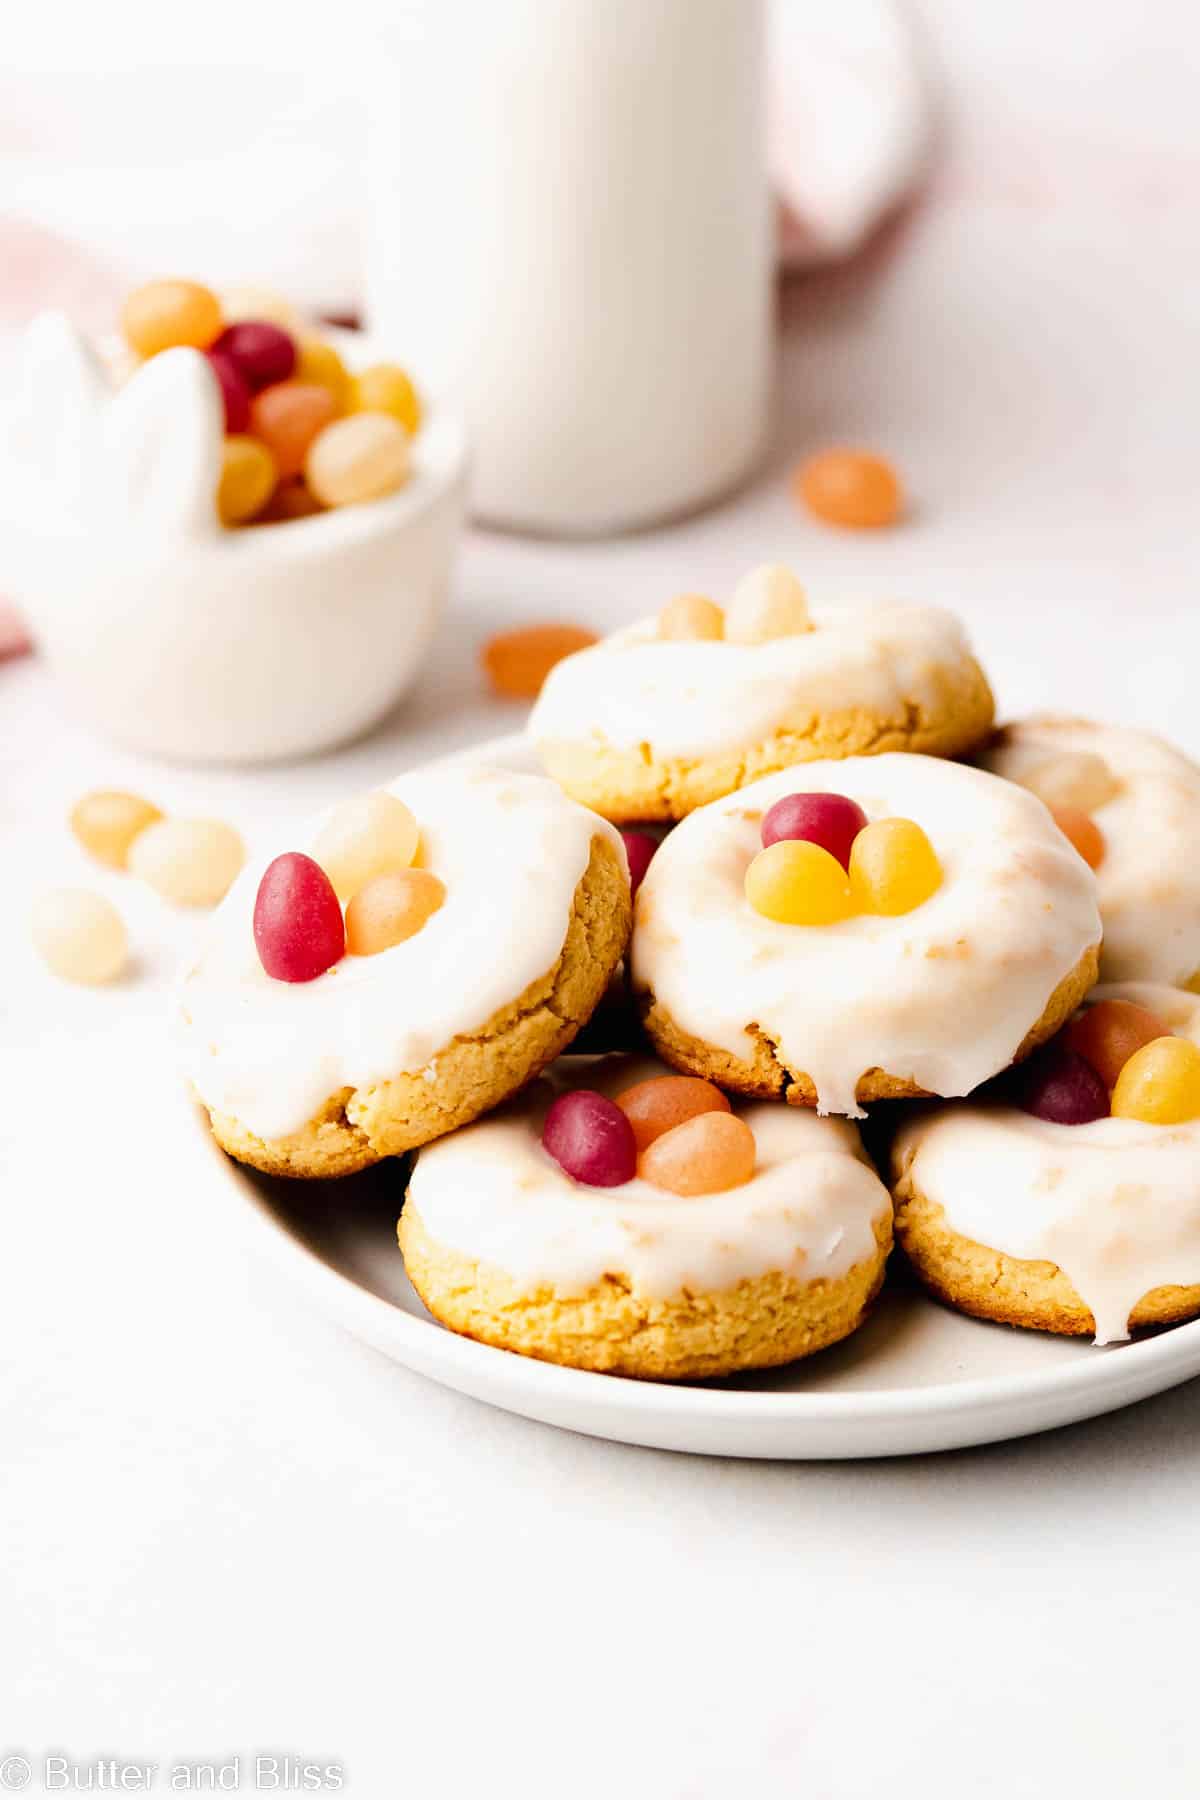 A plate of buttery soft gluten free jelly bean lemon cookies set on a table.